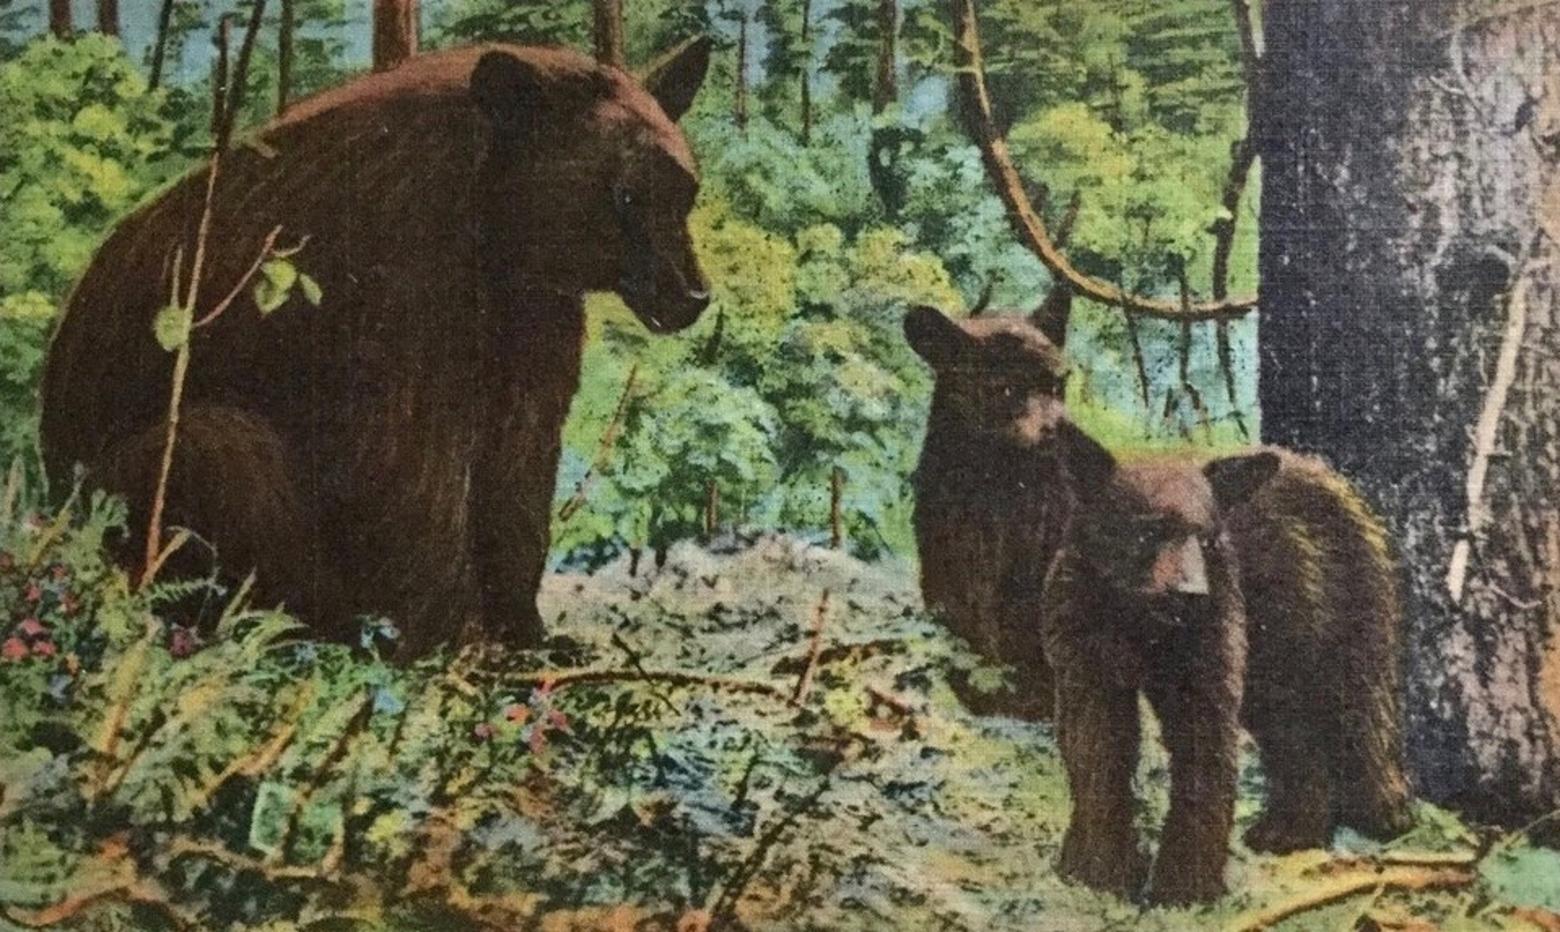 Antique postcard featuring black bears in New York state's Adirondack mountains.